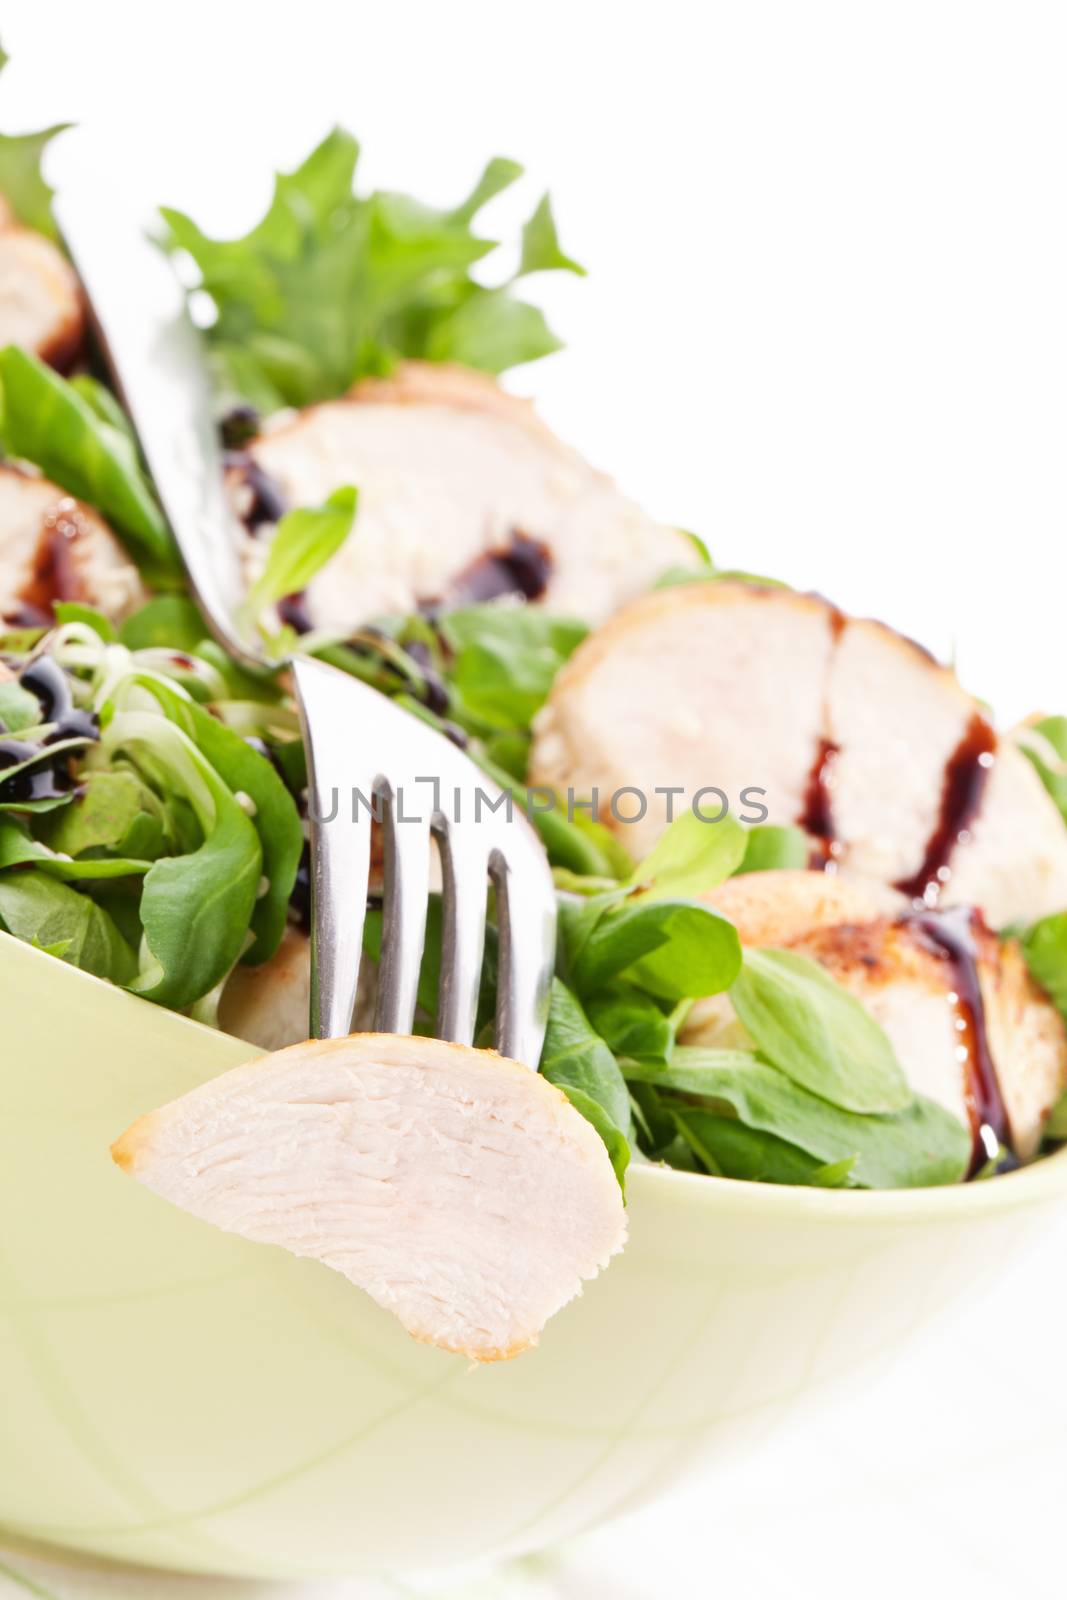 Luxurious fresh corn salad with grilled chicken pieces and balsamico dressing in bowl. Luxurious fresh light summer eating.